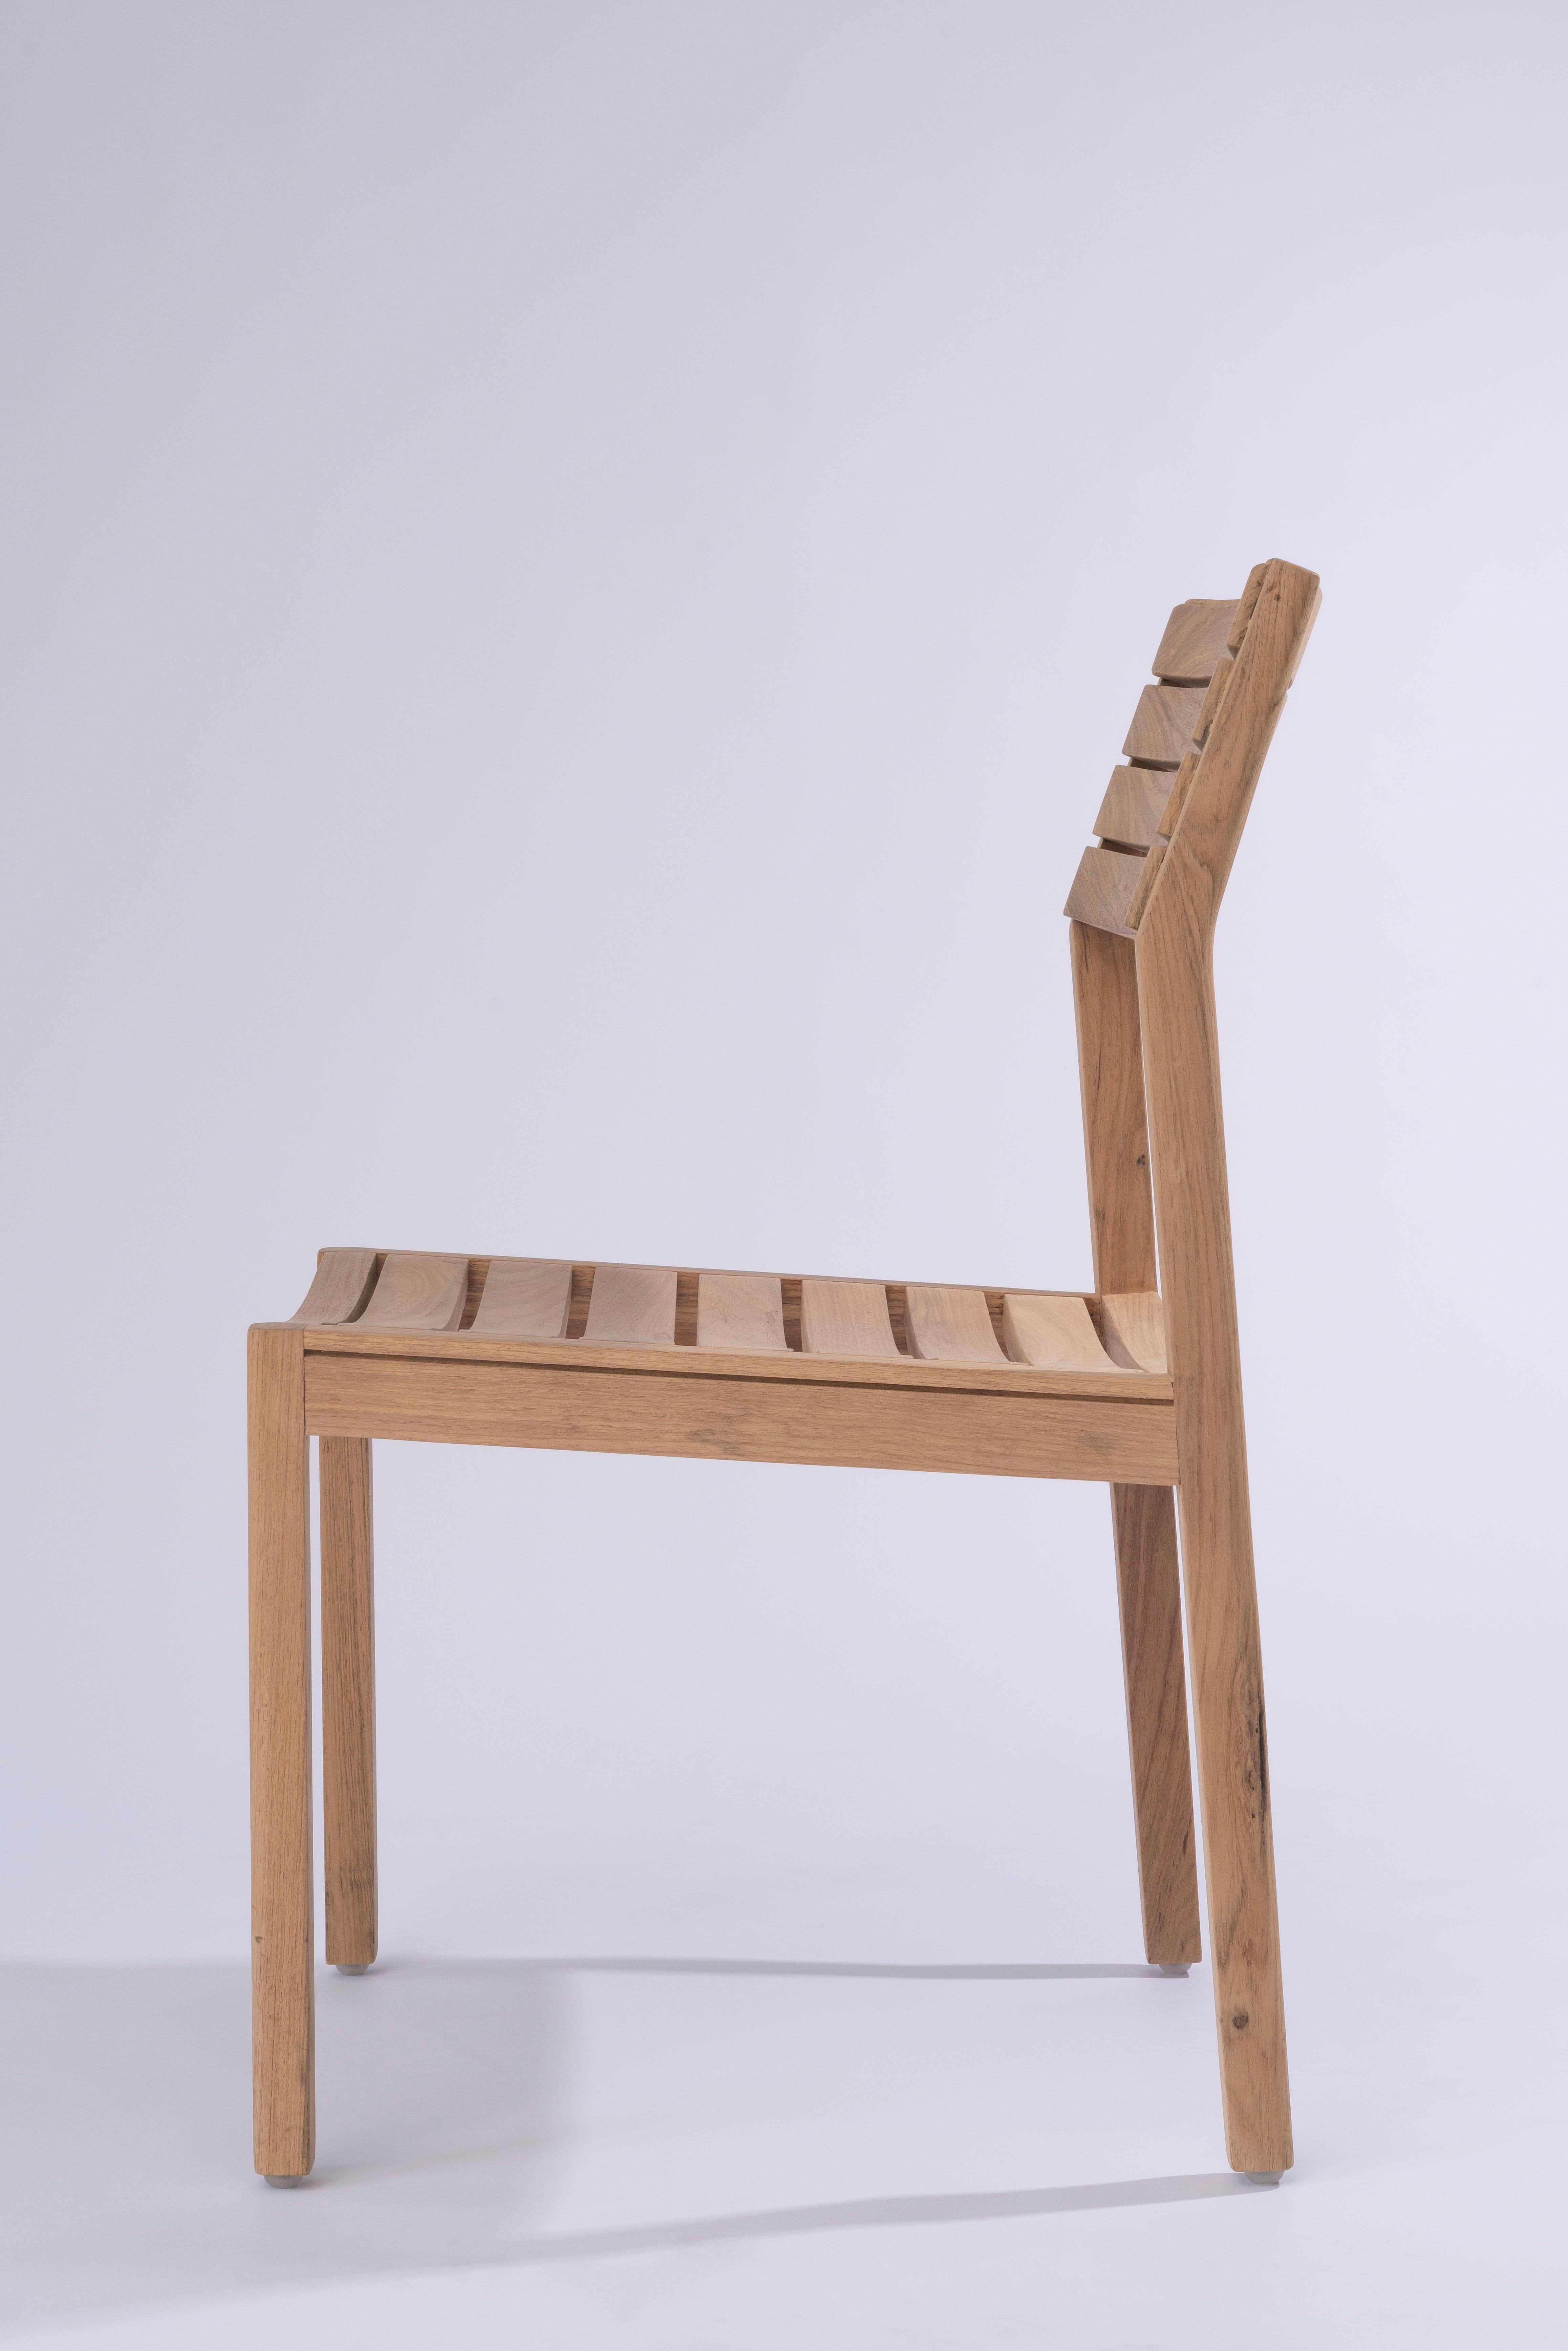 Solid Wood Arms Chair with Wooden Slats, for the Outside, Outdoor Resistant For Sale 5